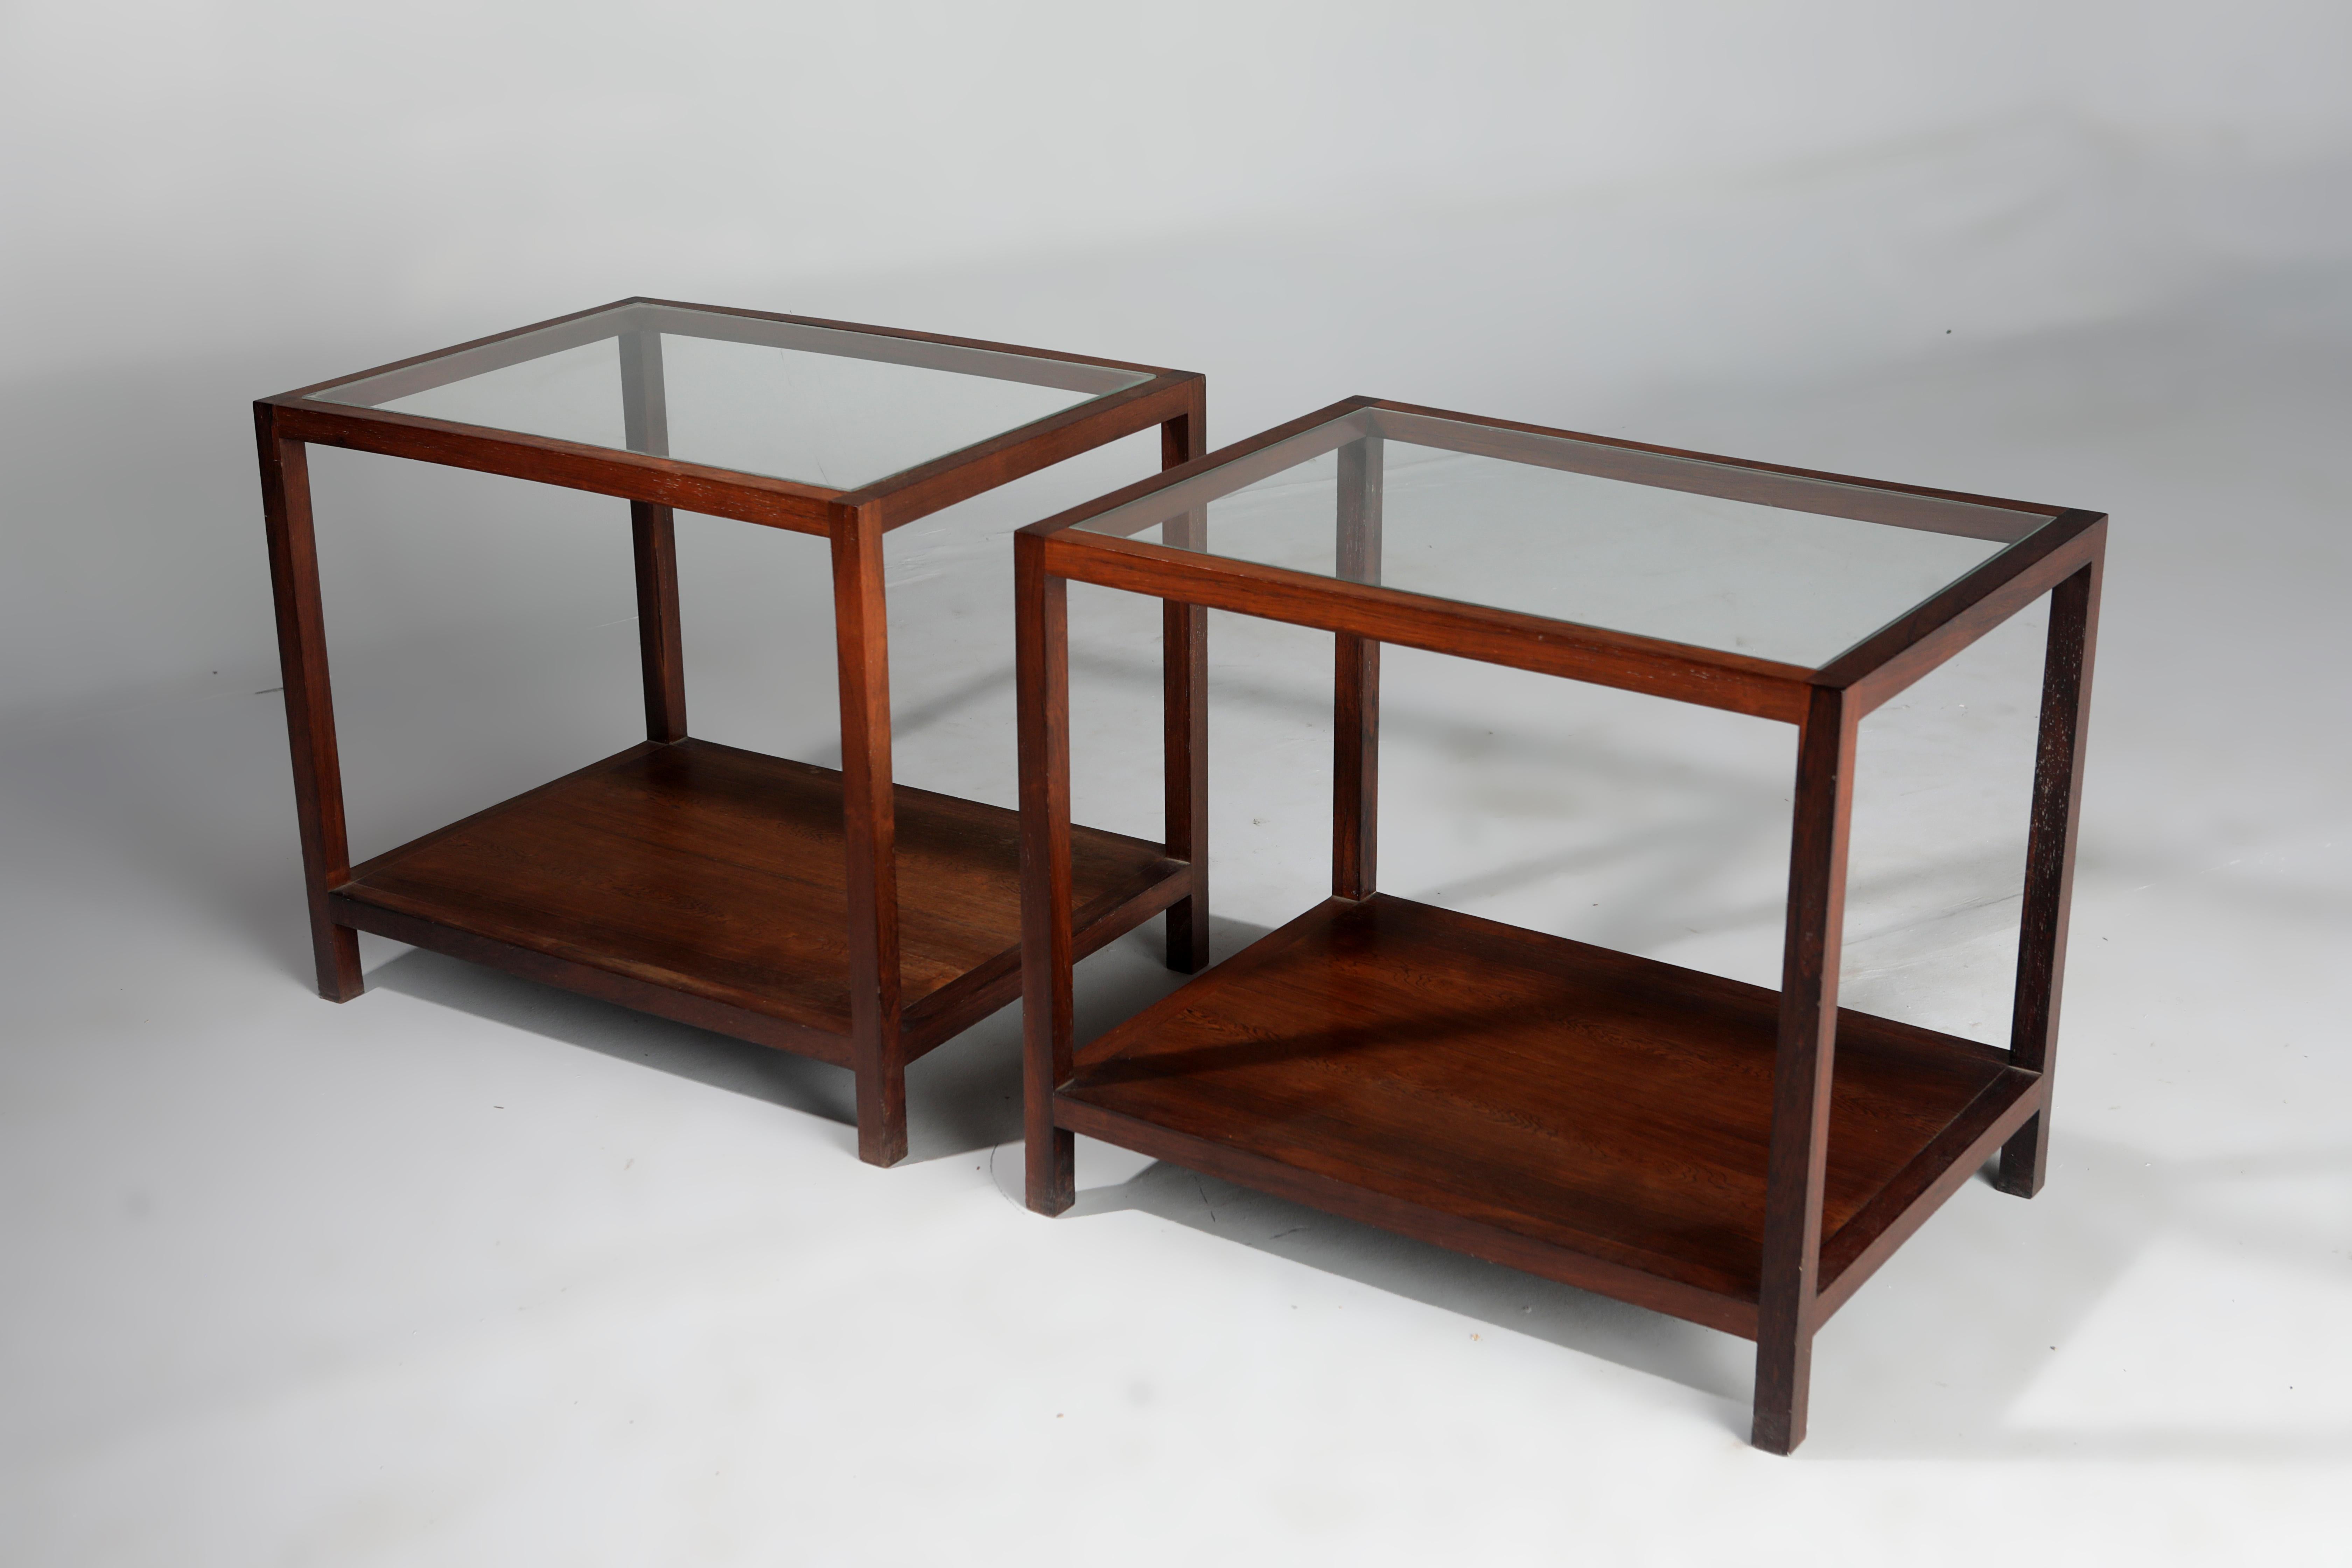 Mid-Century Modern Pair of Side Tables by Joaquim Tenreiro, Brazil, 1960s

Side tables designed by the renowned Brazilian designer, Joaquim Tenreiro, crafted during the mid-20th century, and exemplifies the clean lines and understated elegance that